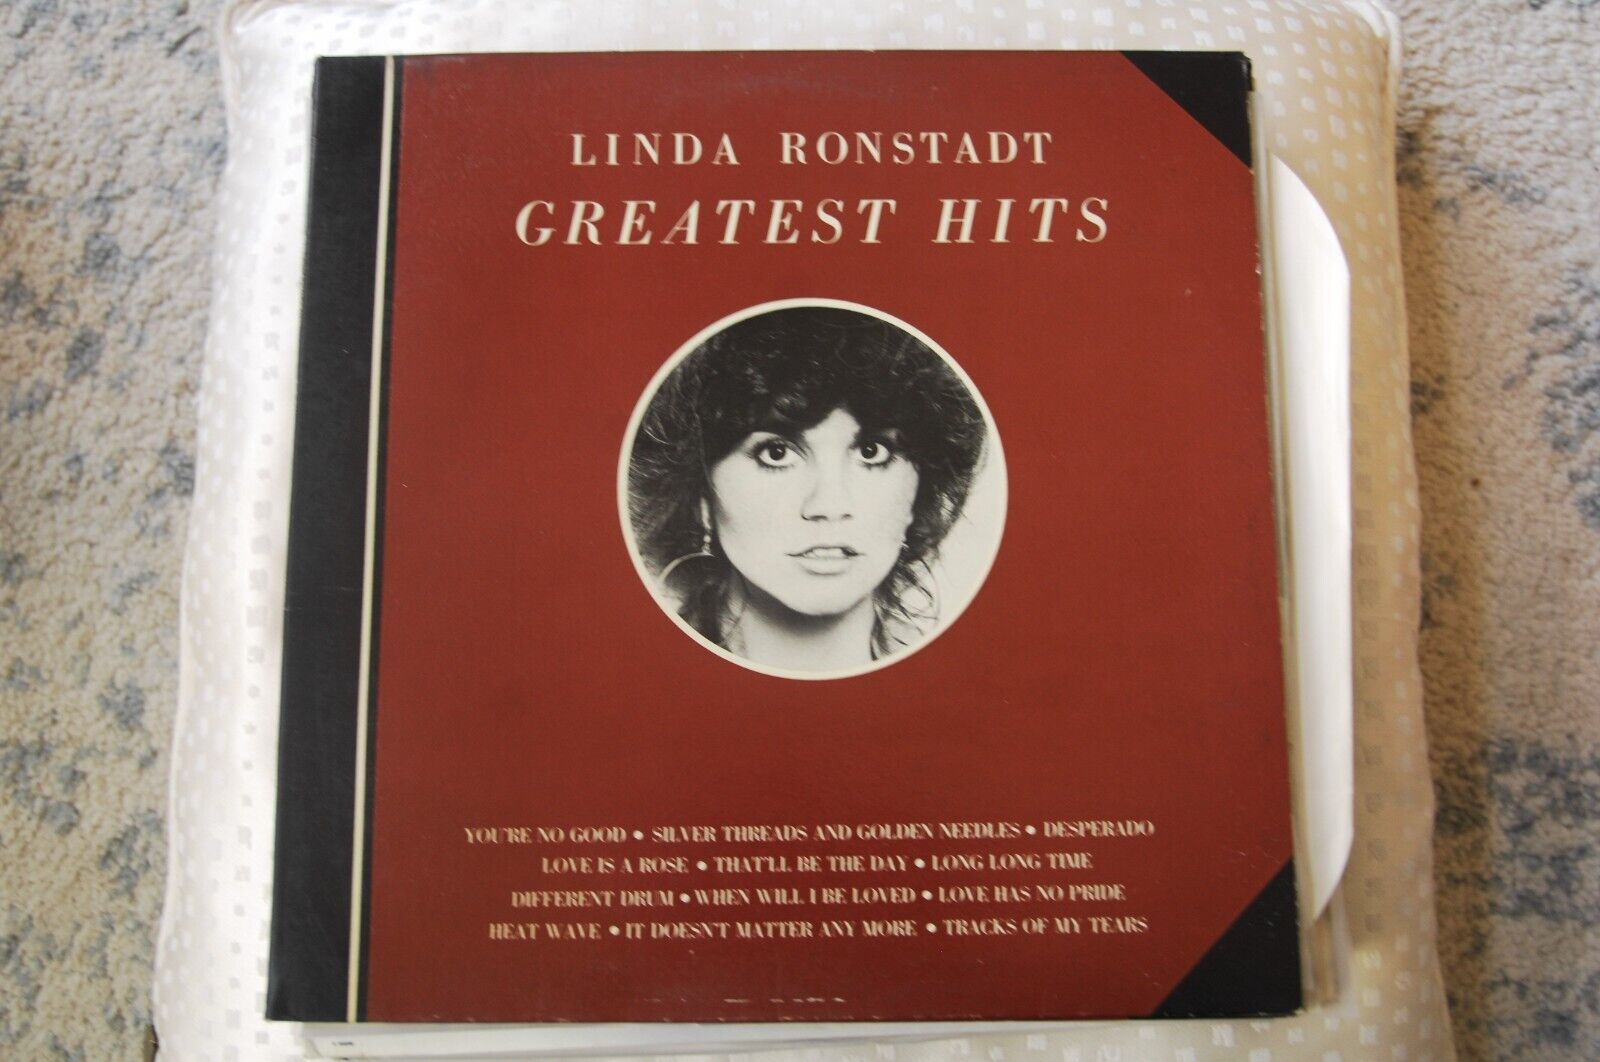 Linda Ronstadt, Greatest Hits, Asylum 7E-1092, play graded P LP, VG cover AS IS